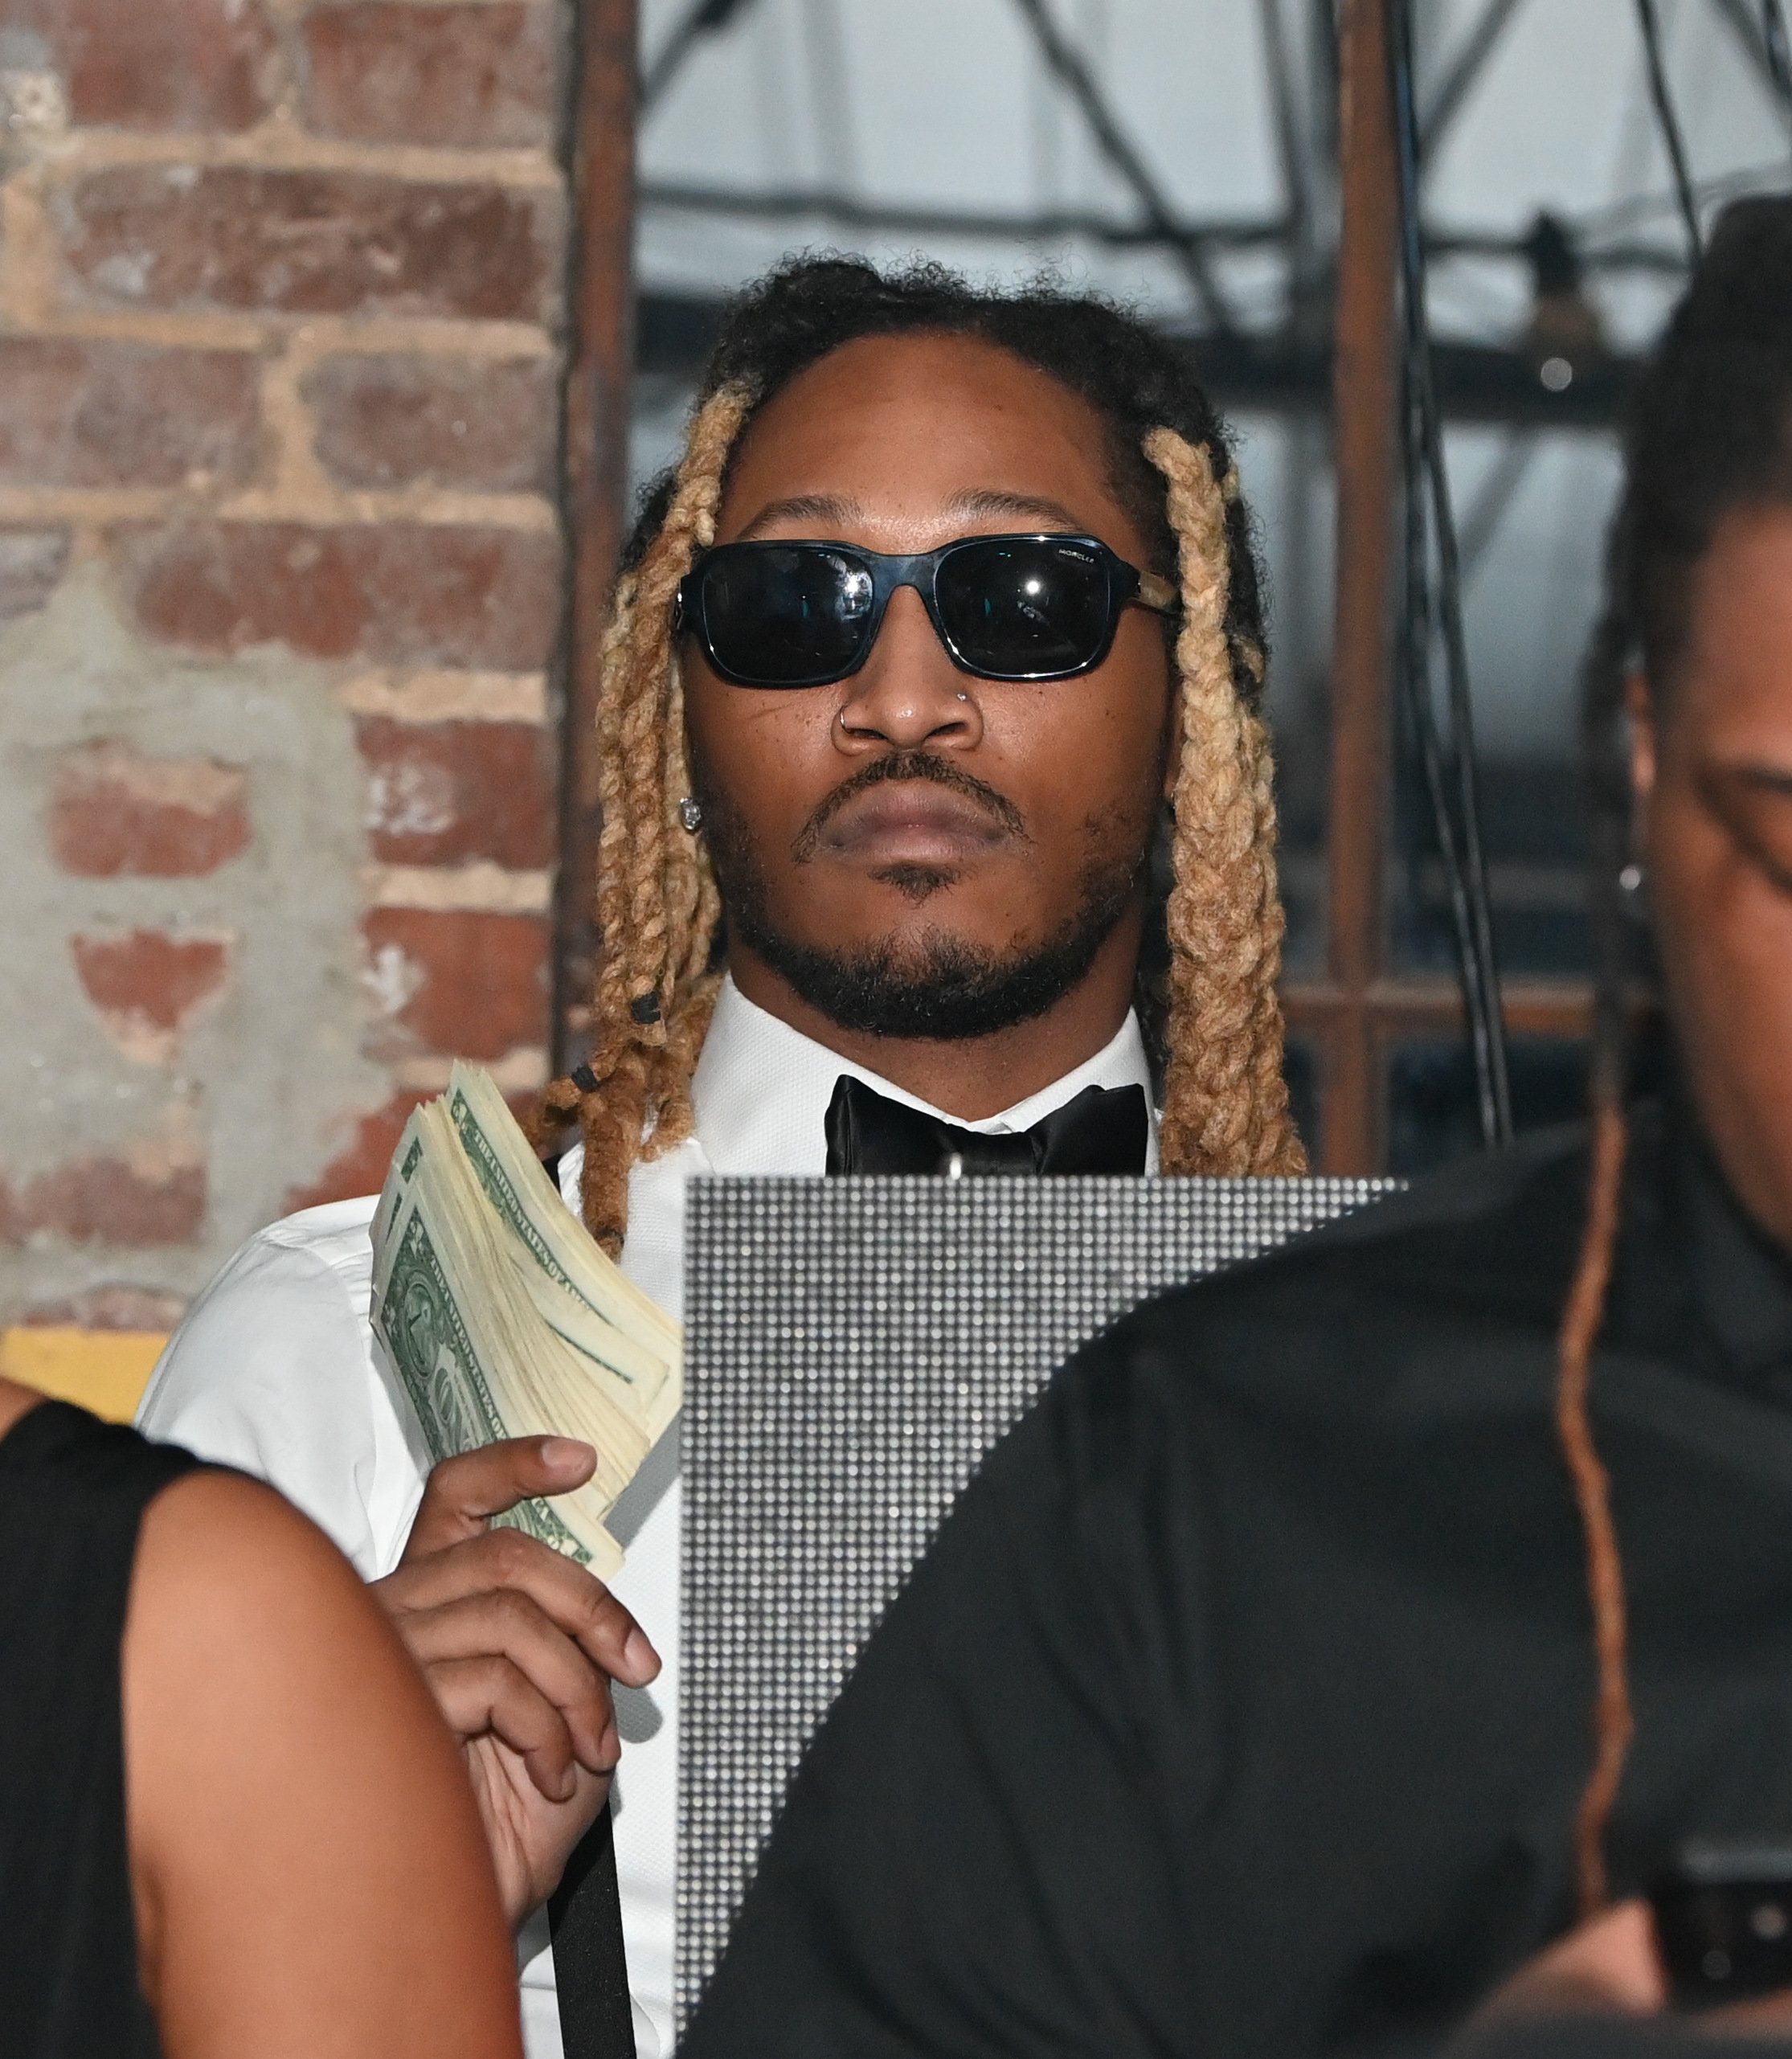 Future holding money at a Gentleman's Club in Atlanta, Georgia, on November 17, 2021. | Source: Getty Images